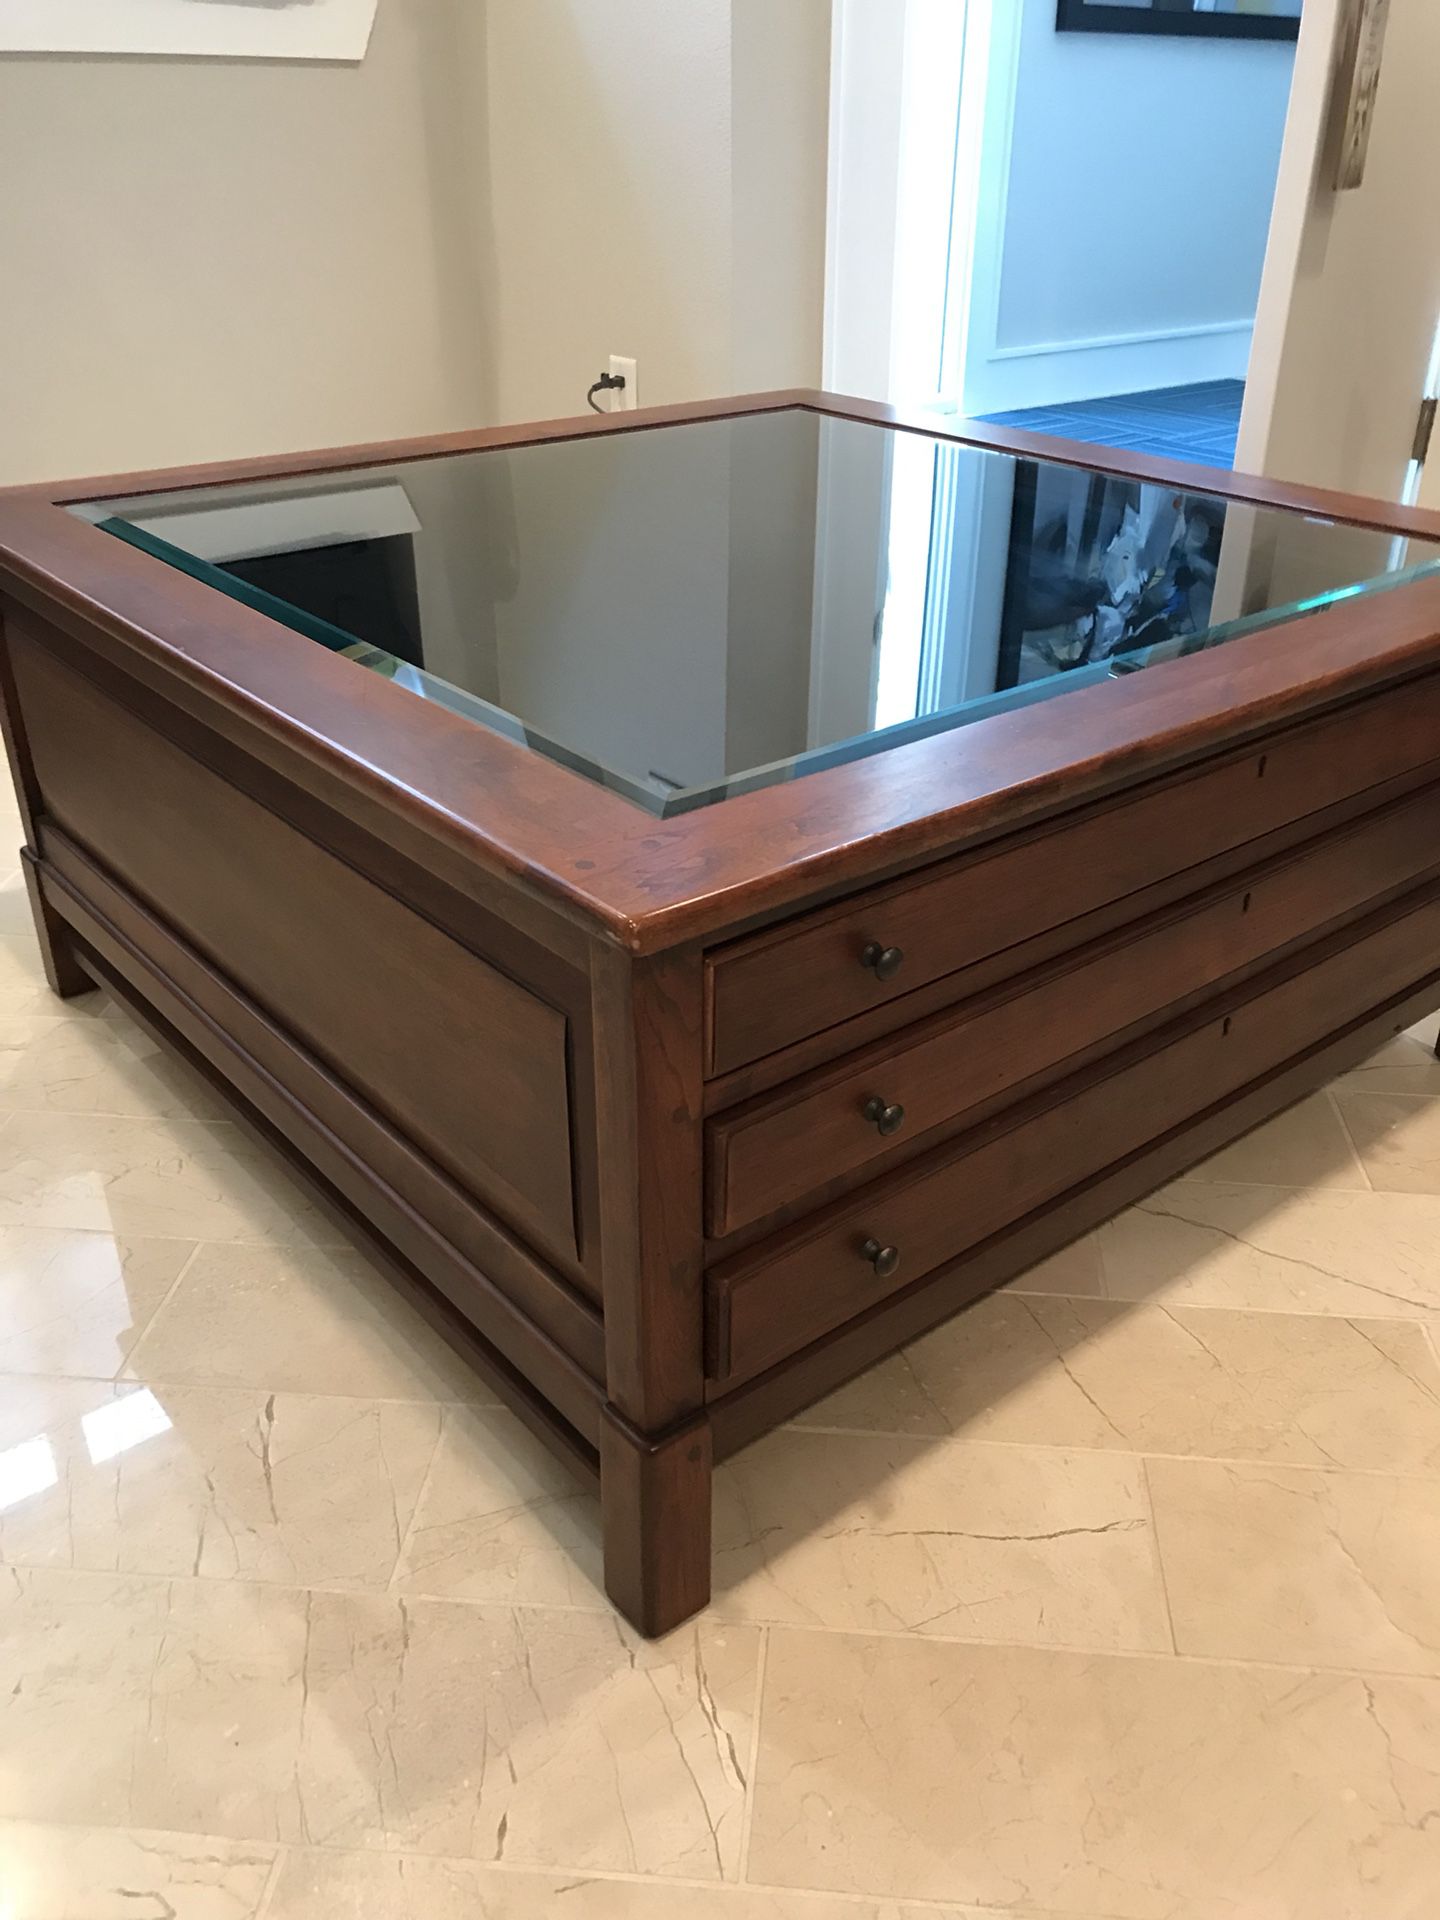 Display coffee table and matching side table